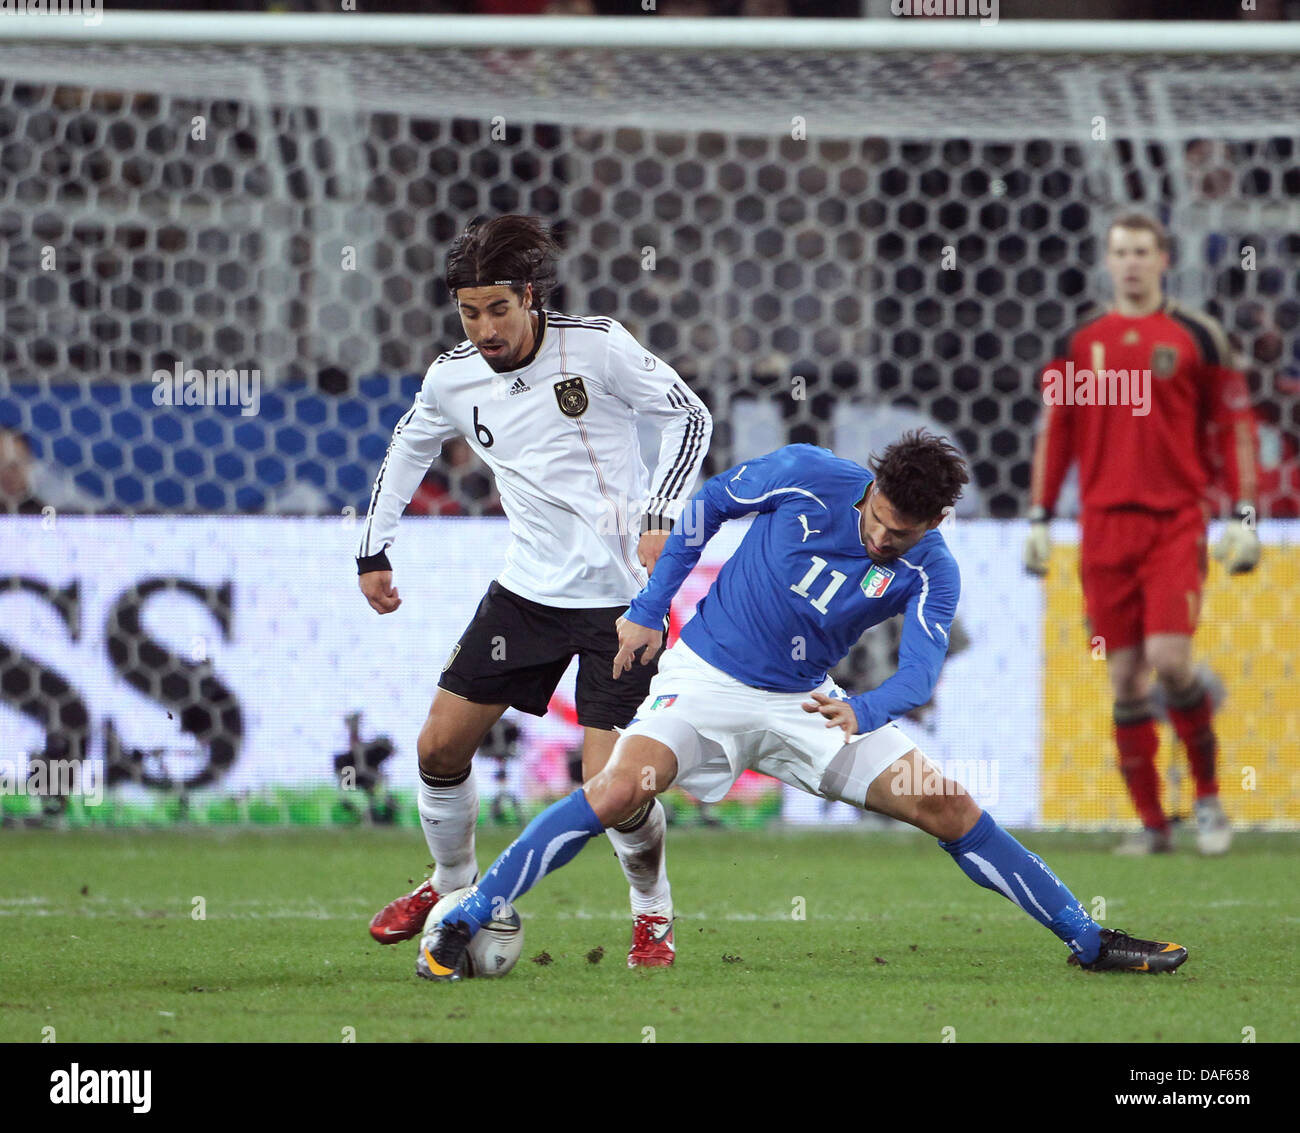 Germany's Sami Khedira (L) and Marco Borriello (R) of Italy fight for the ball during the friendly soccer match between Germany and Italy at Signal Iduna Park stadium in Dortmund, Germany, 09 February 2011. Photo: Friso Gentsch Stock Photo